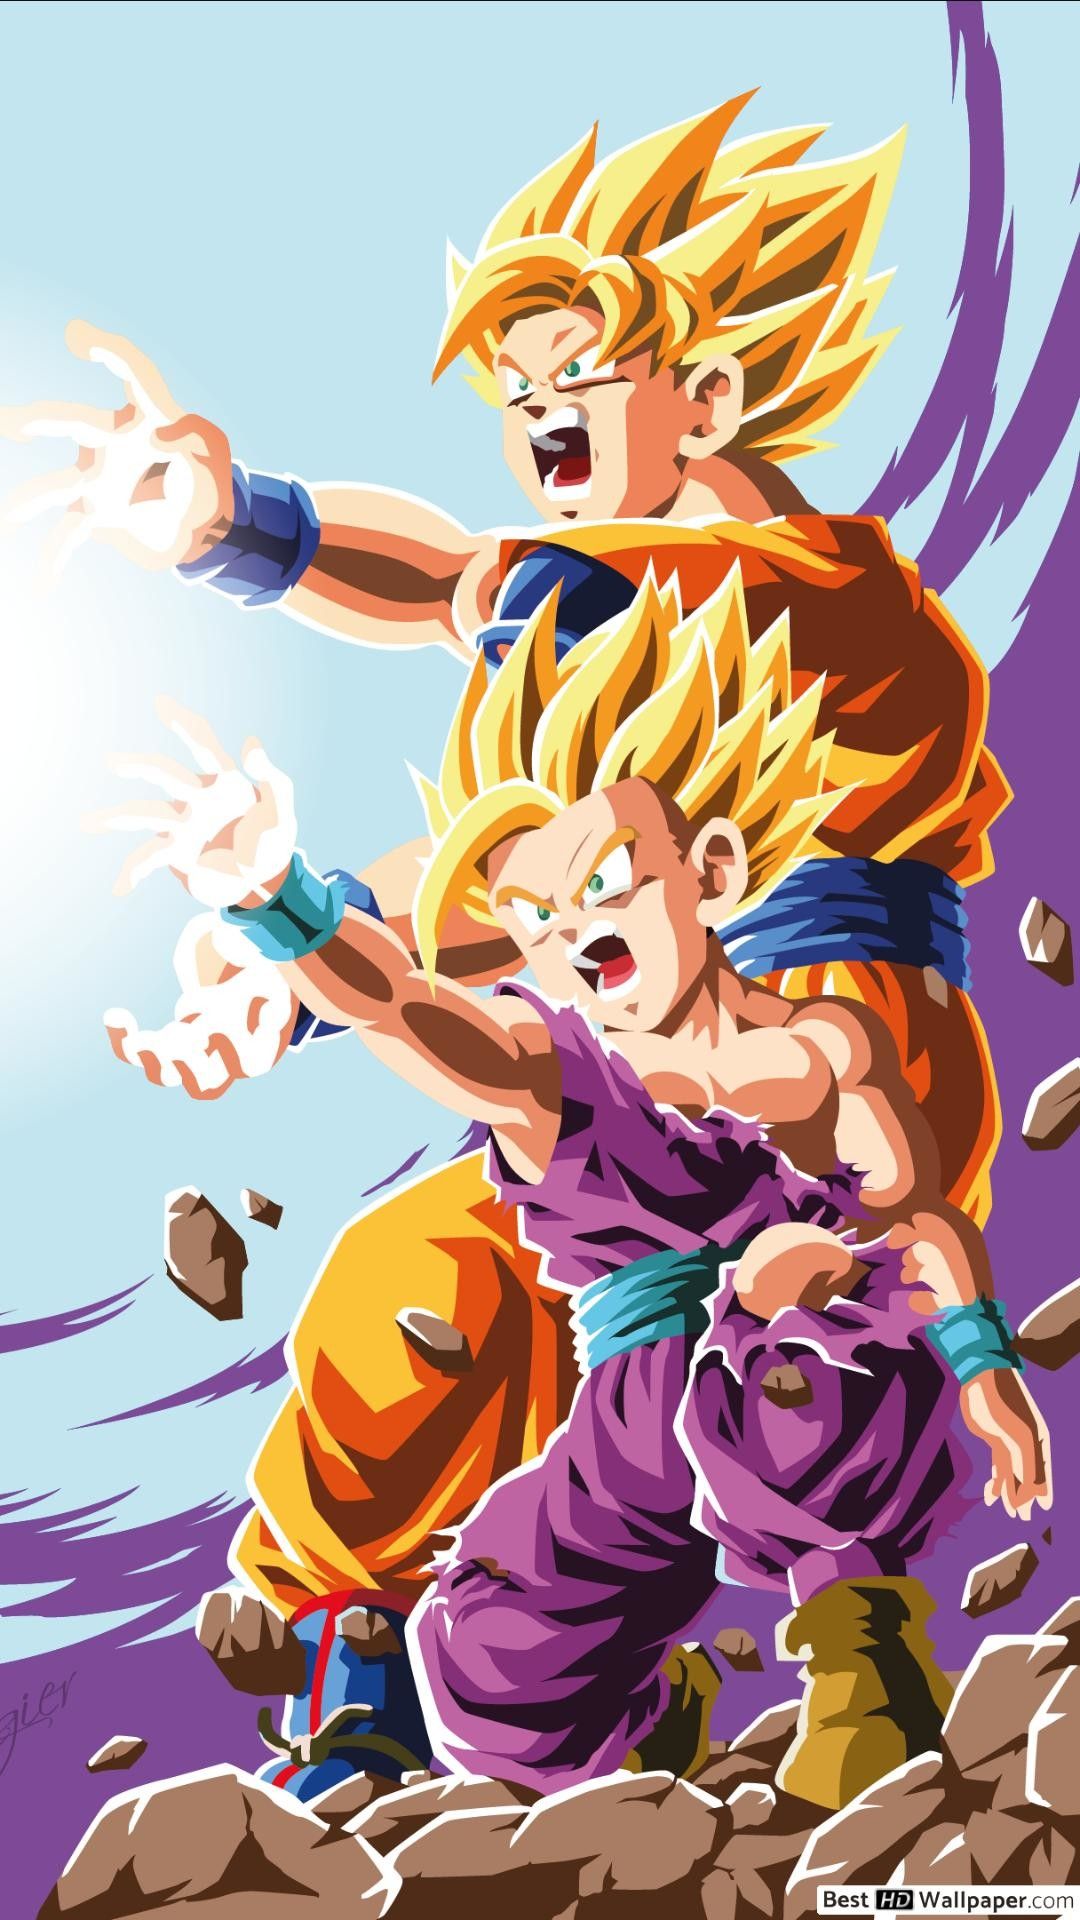 Gohan Dragon Ball Z iPhone Wallpaper & Background Beautiful Best Available For Download Gohan Dragon Ball Z iPhone Photo Free On Zicxa.com Image